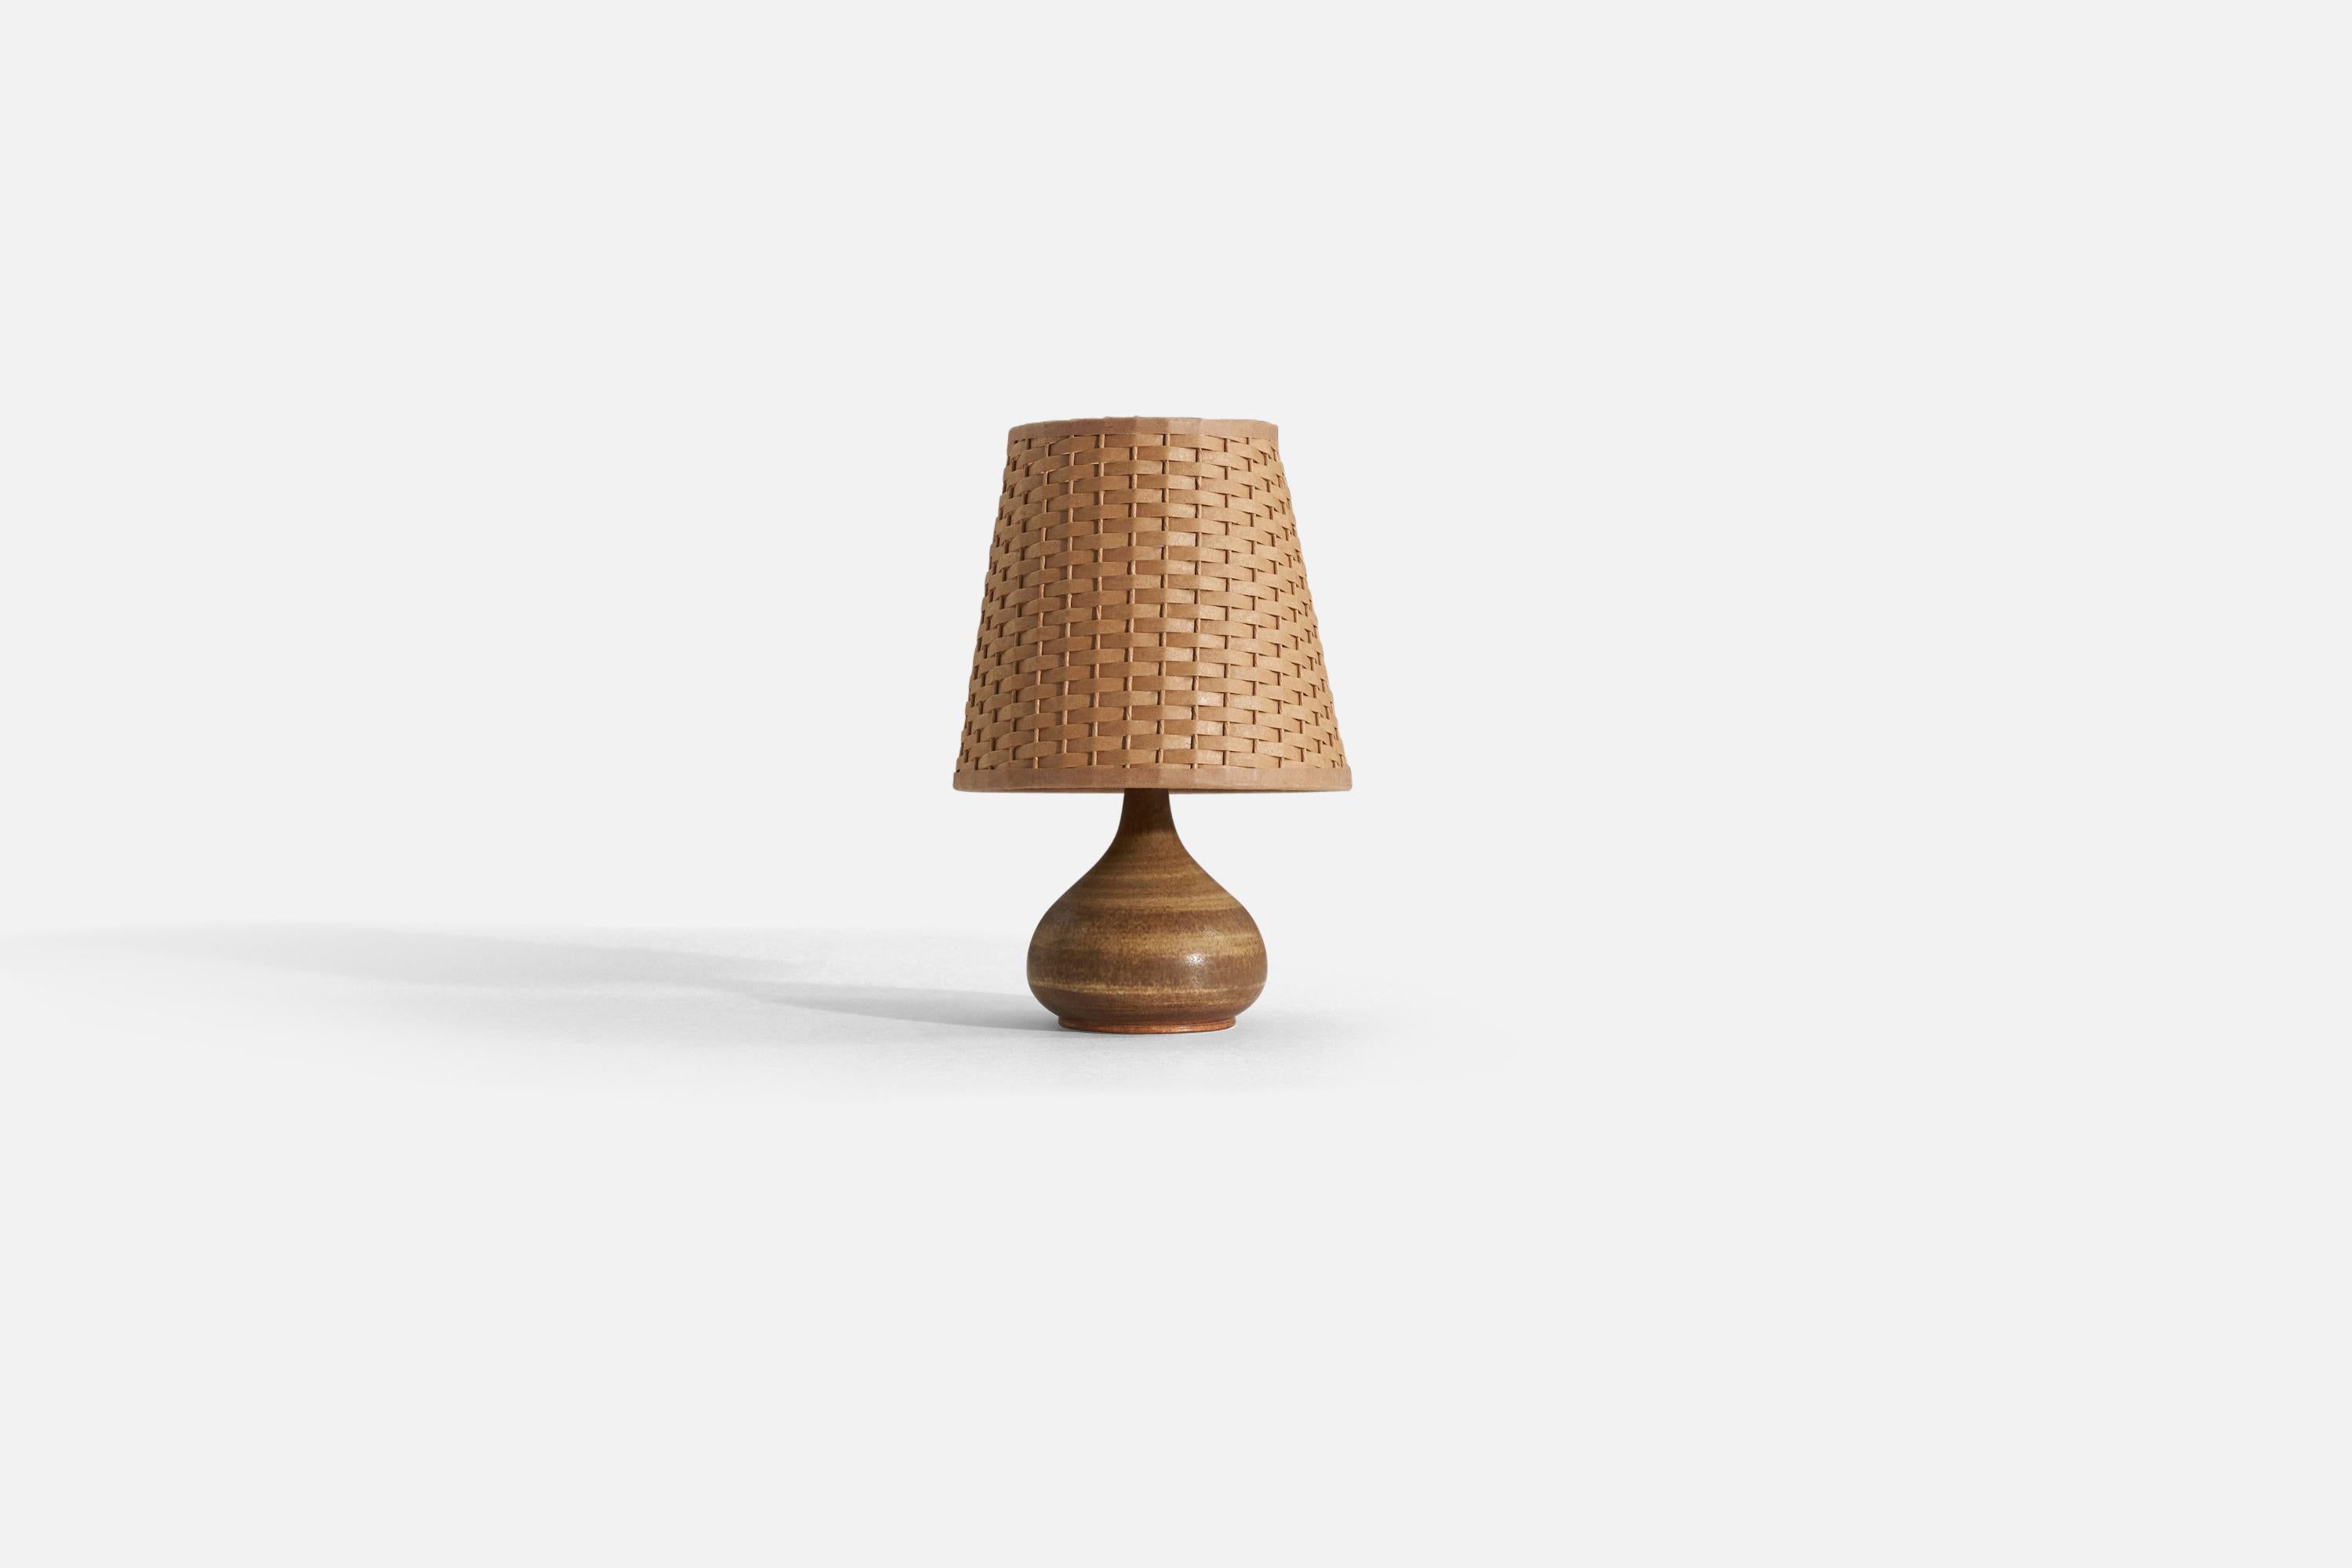 A brown-glazed stoneware table lamp designed by Gunnar Borg for Höganäs, Sweden, 1960s.

Stated dimensions exclude lampshade, upon request illustrated lampshade can be included in purchase.

Measurements listed are of lamp.
Shade : 4.25 x 6.25